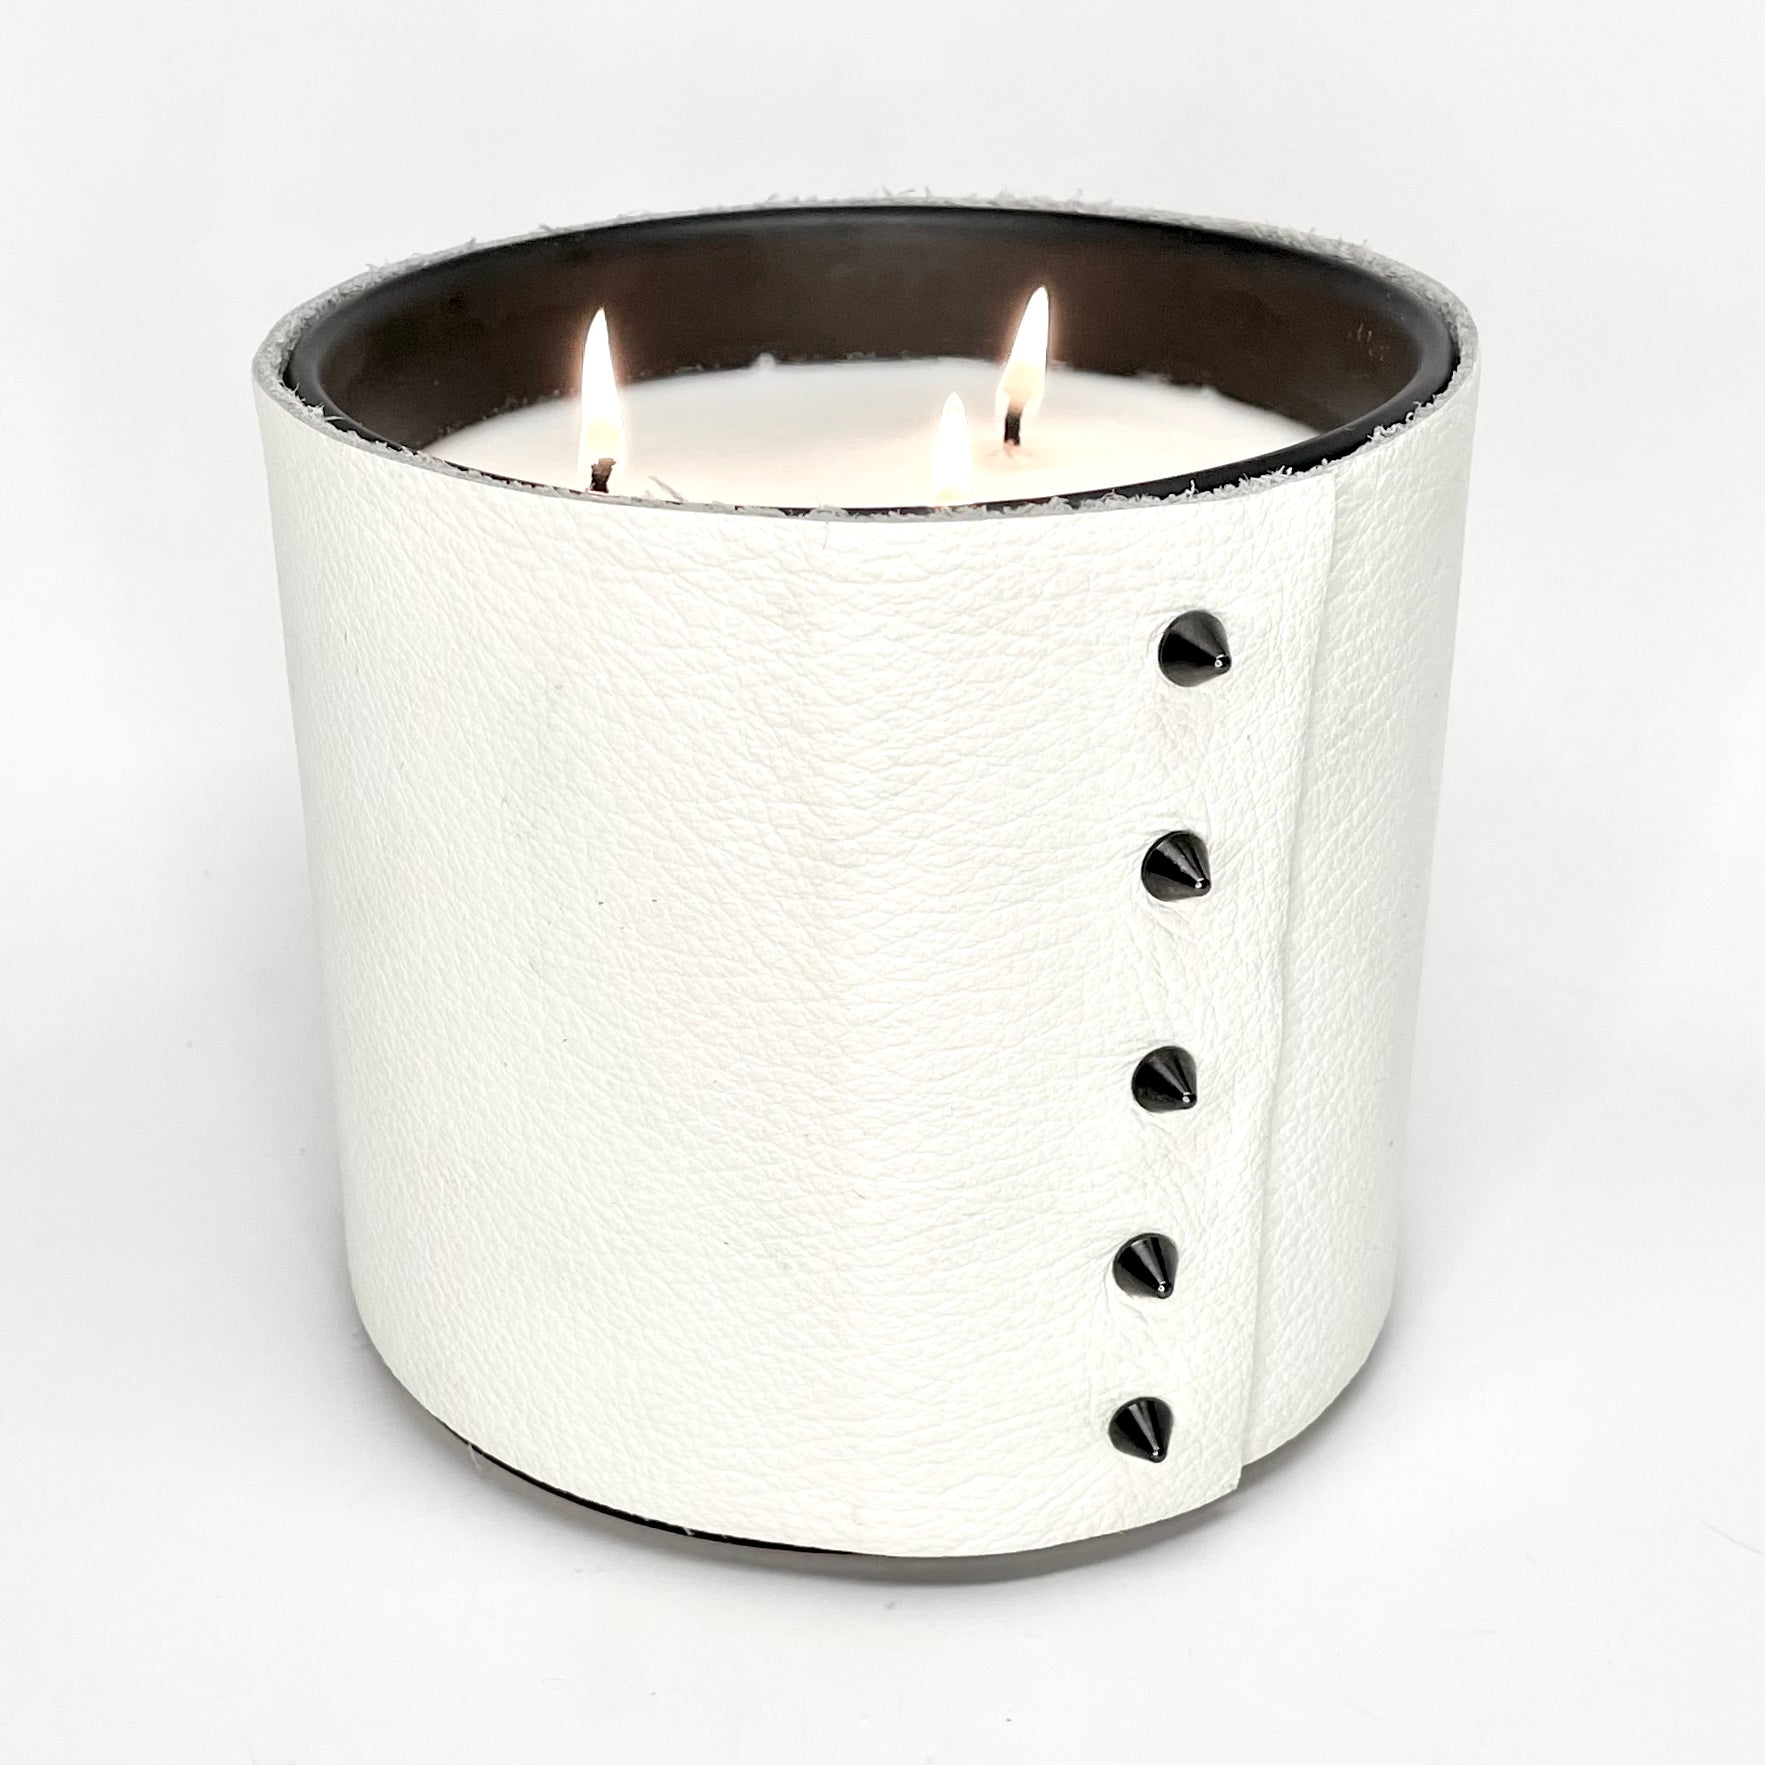 large soy candle with 3 wicks wrapped in a textured white leather with 5 cone shaped black studs